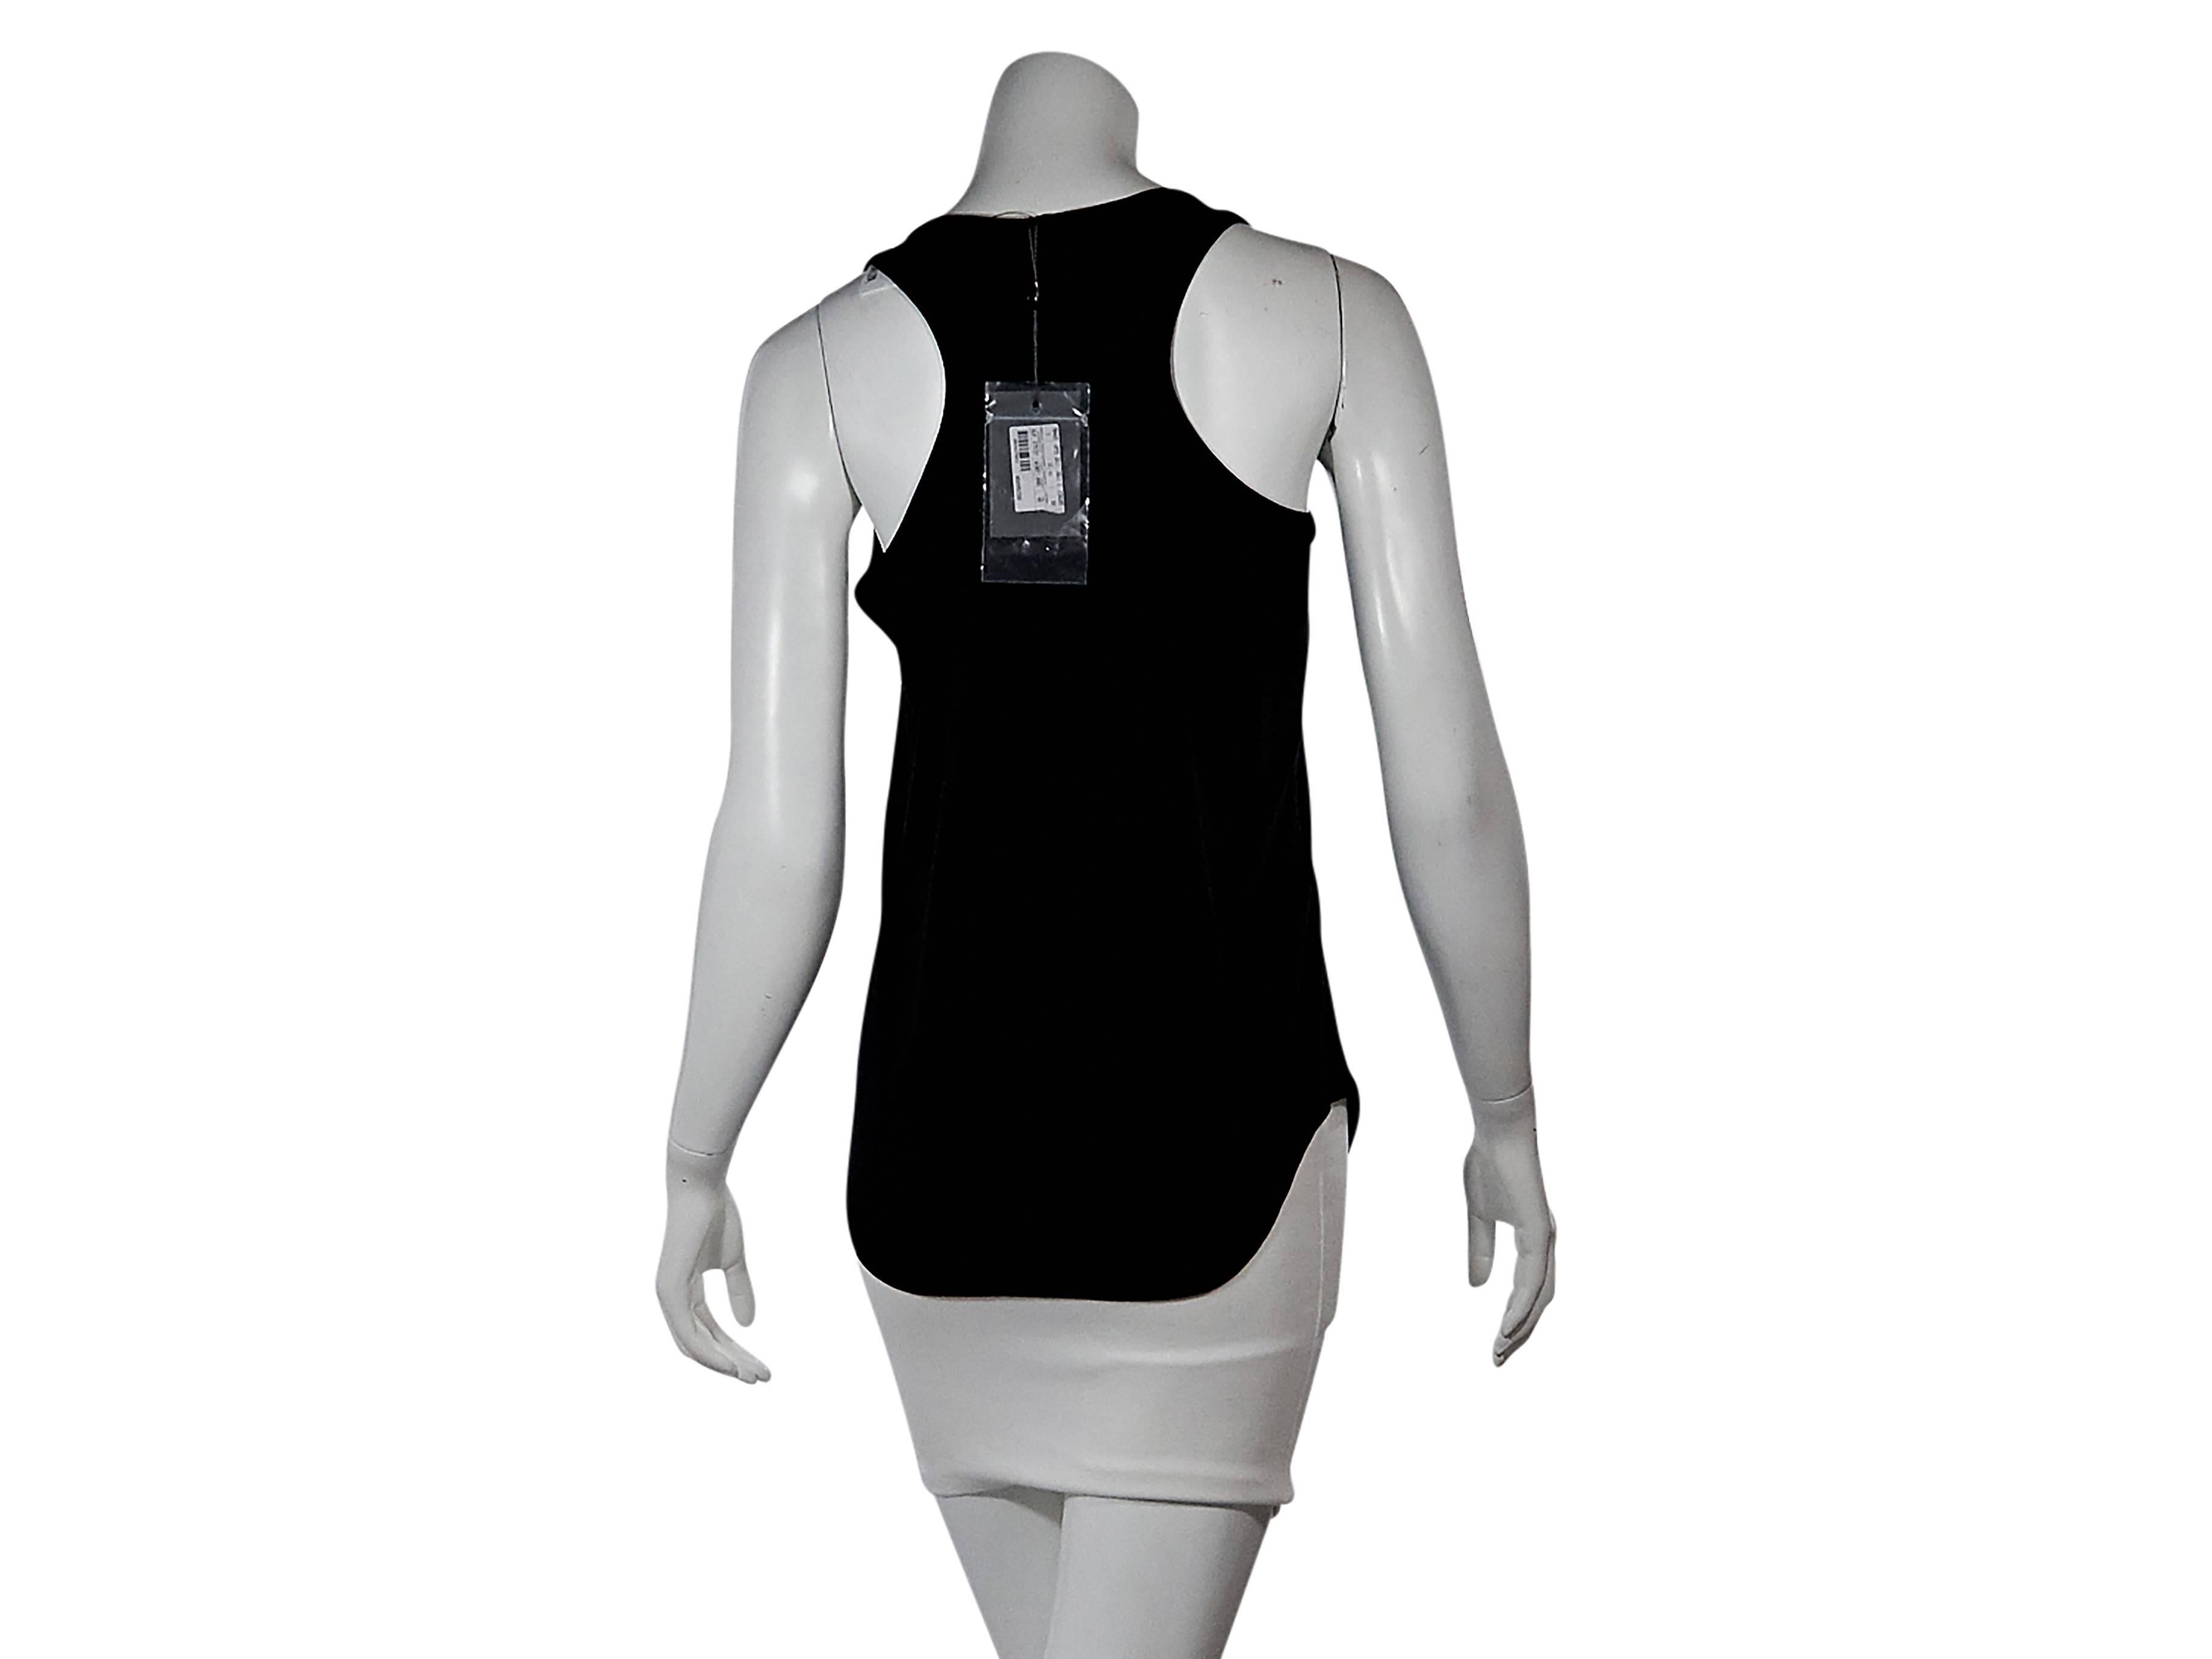 Product details:  Black graphic tank top by Alexander McQueen.  Skull crest print at front.  Scoopneck.  Sleeveless.  Racerback.  Pullover style.  Label size IT 40.  
Condition: Pre-owned.﻿ New with tags.

 Est. Retail $ 275.00